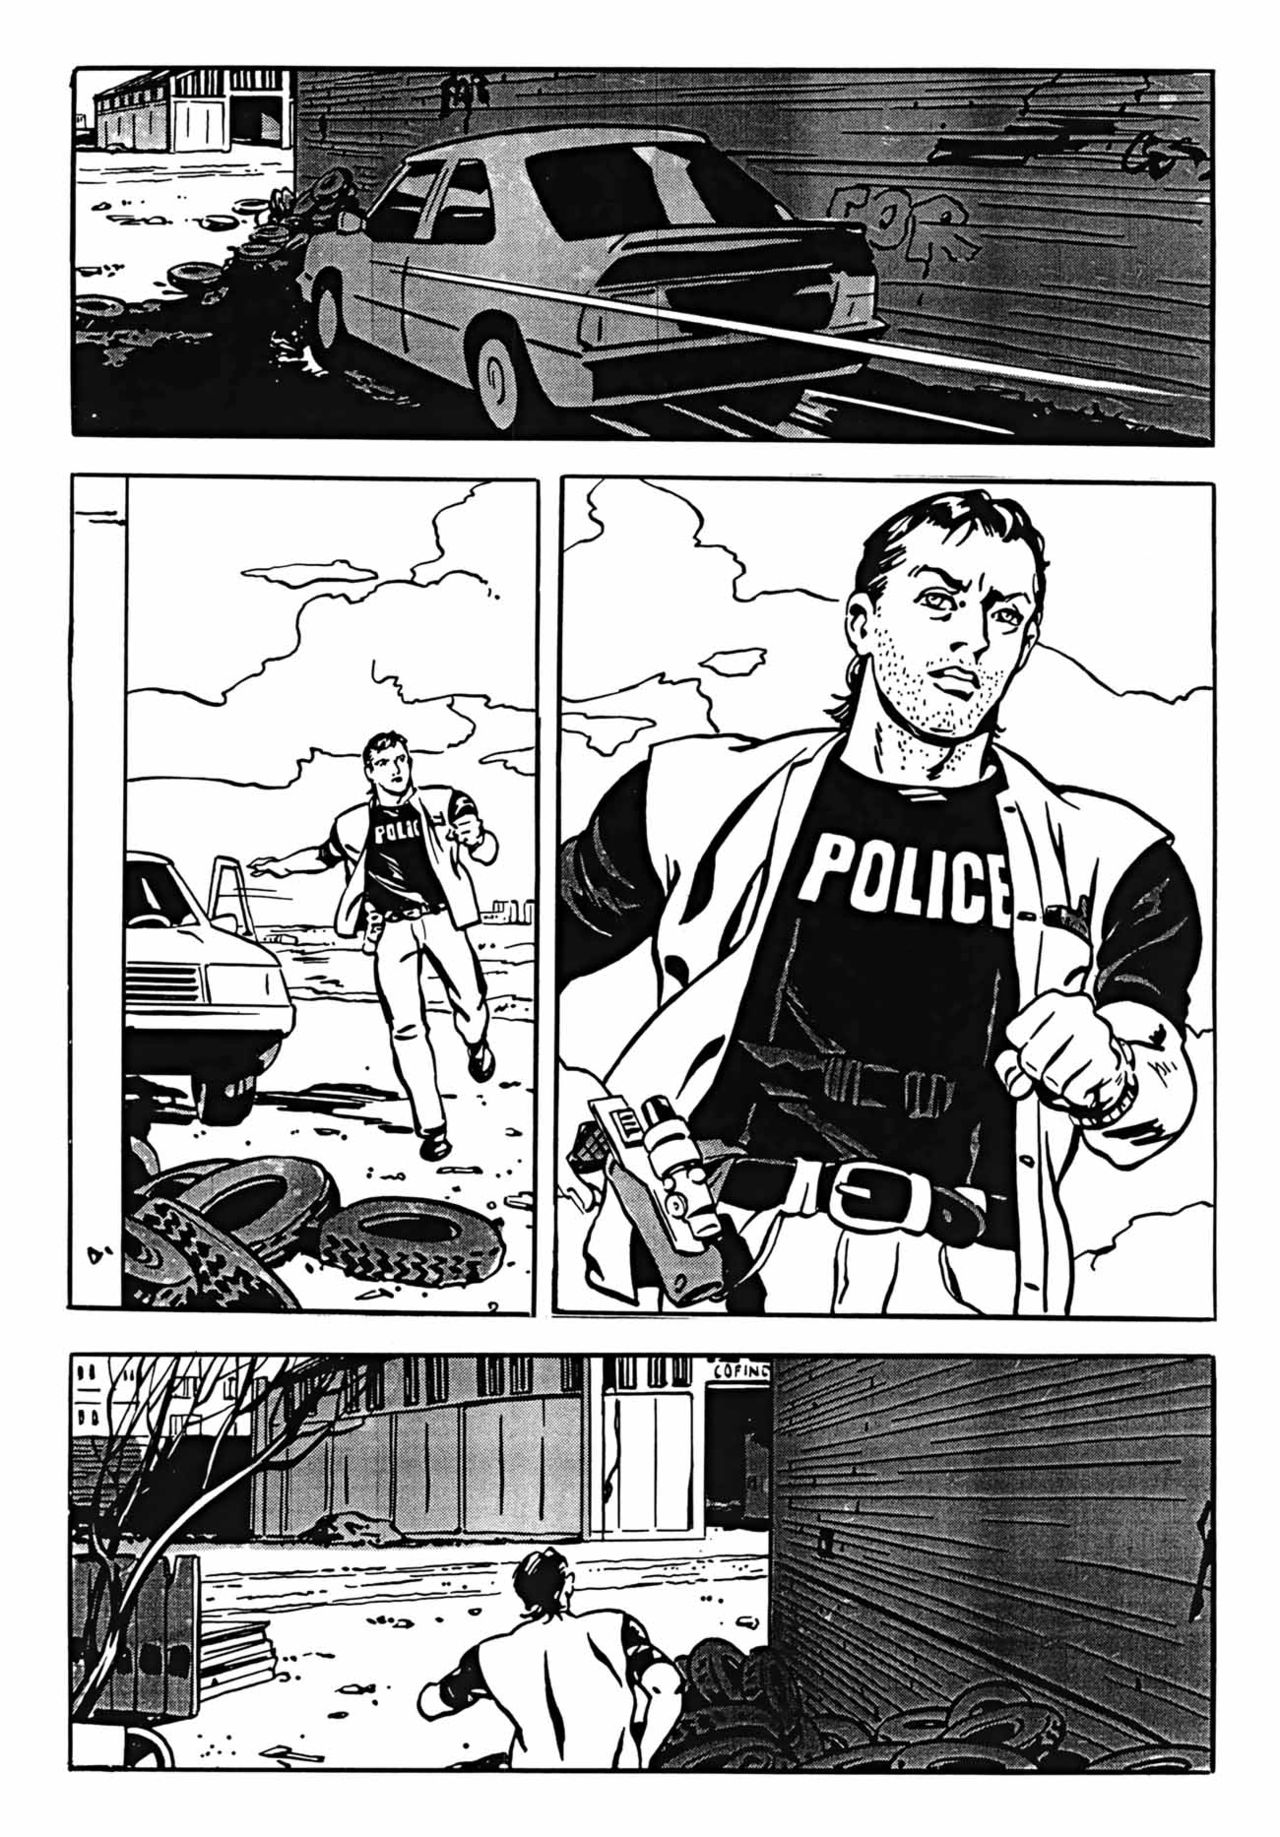 Police By Night - Volume 1 numero d'image 115